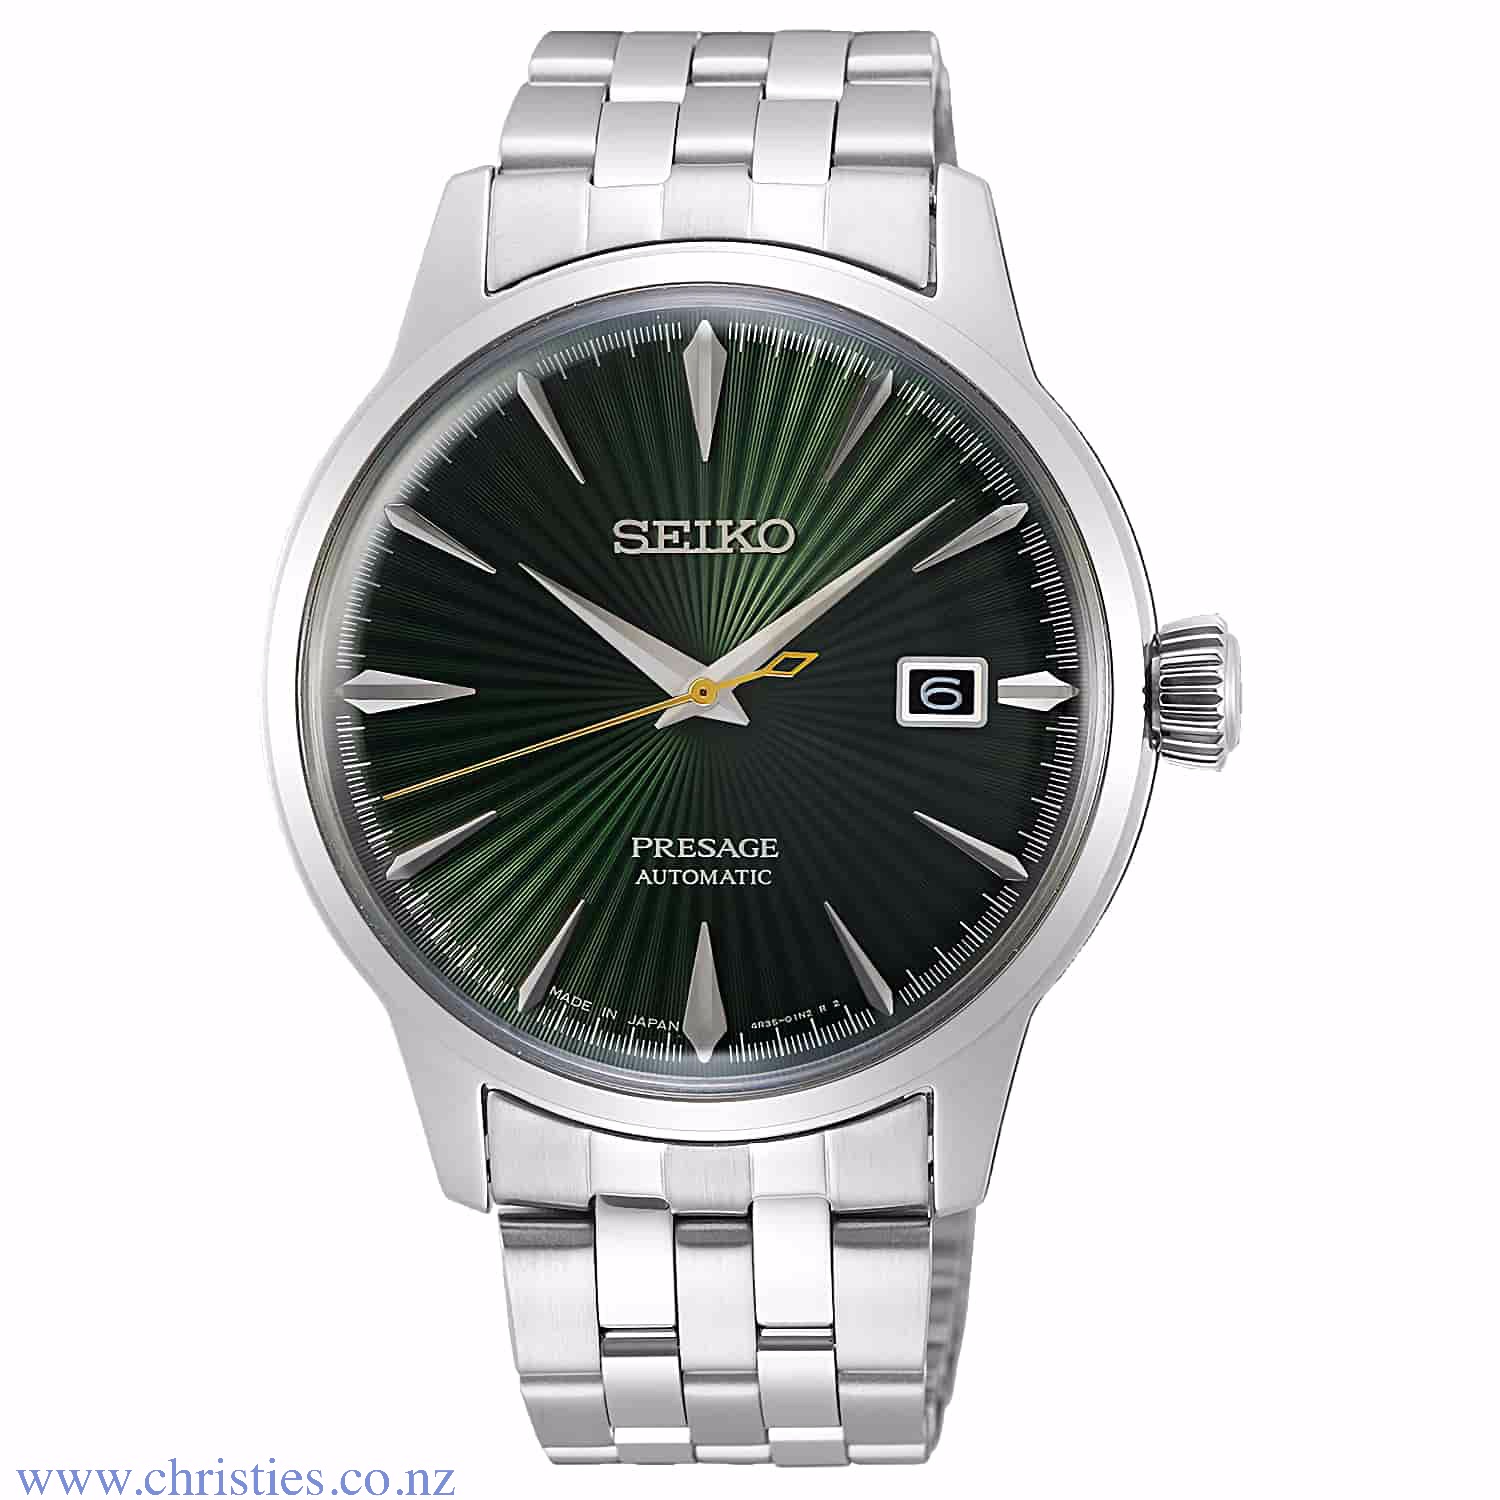 SRPE15J SEIKO Presage Cocktail Time Automatic Watch. The Seiko Presage SRPE15J is an automatic movement watch with a manual winding capacity. This mens watch features a stainless steel case and bracelet with a sunburst green face and a date function. The 